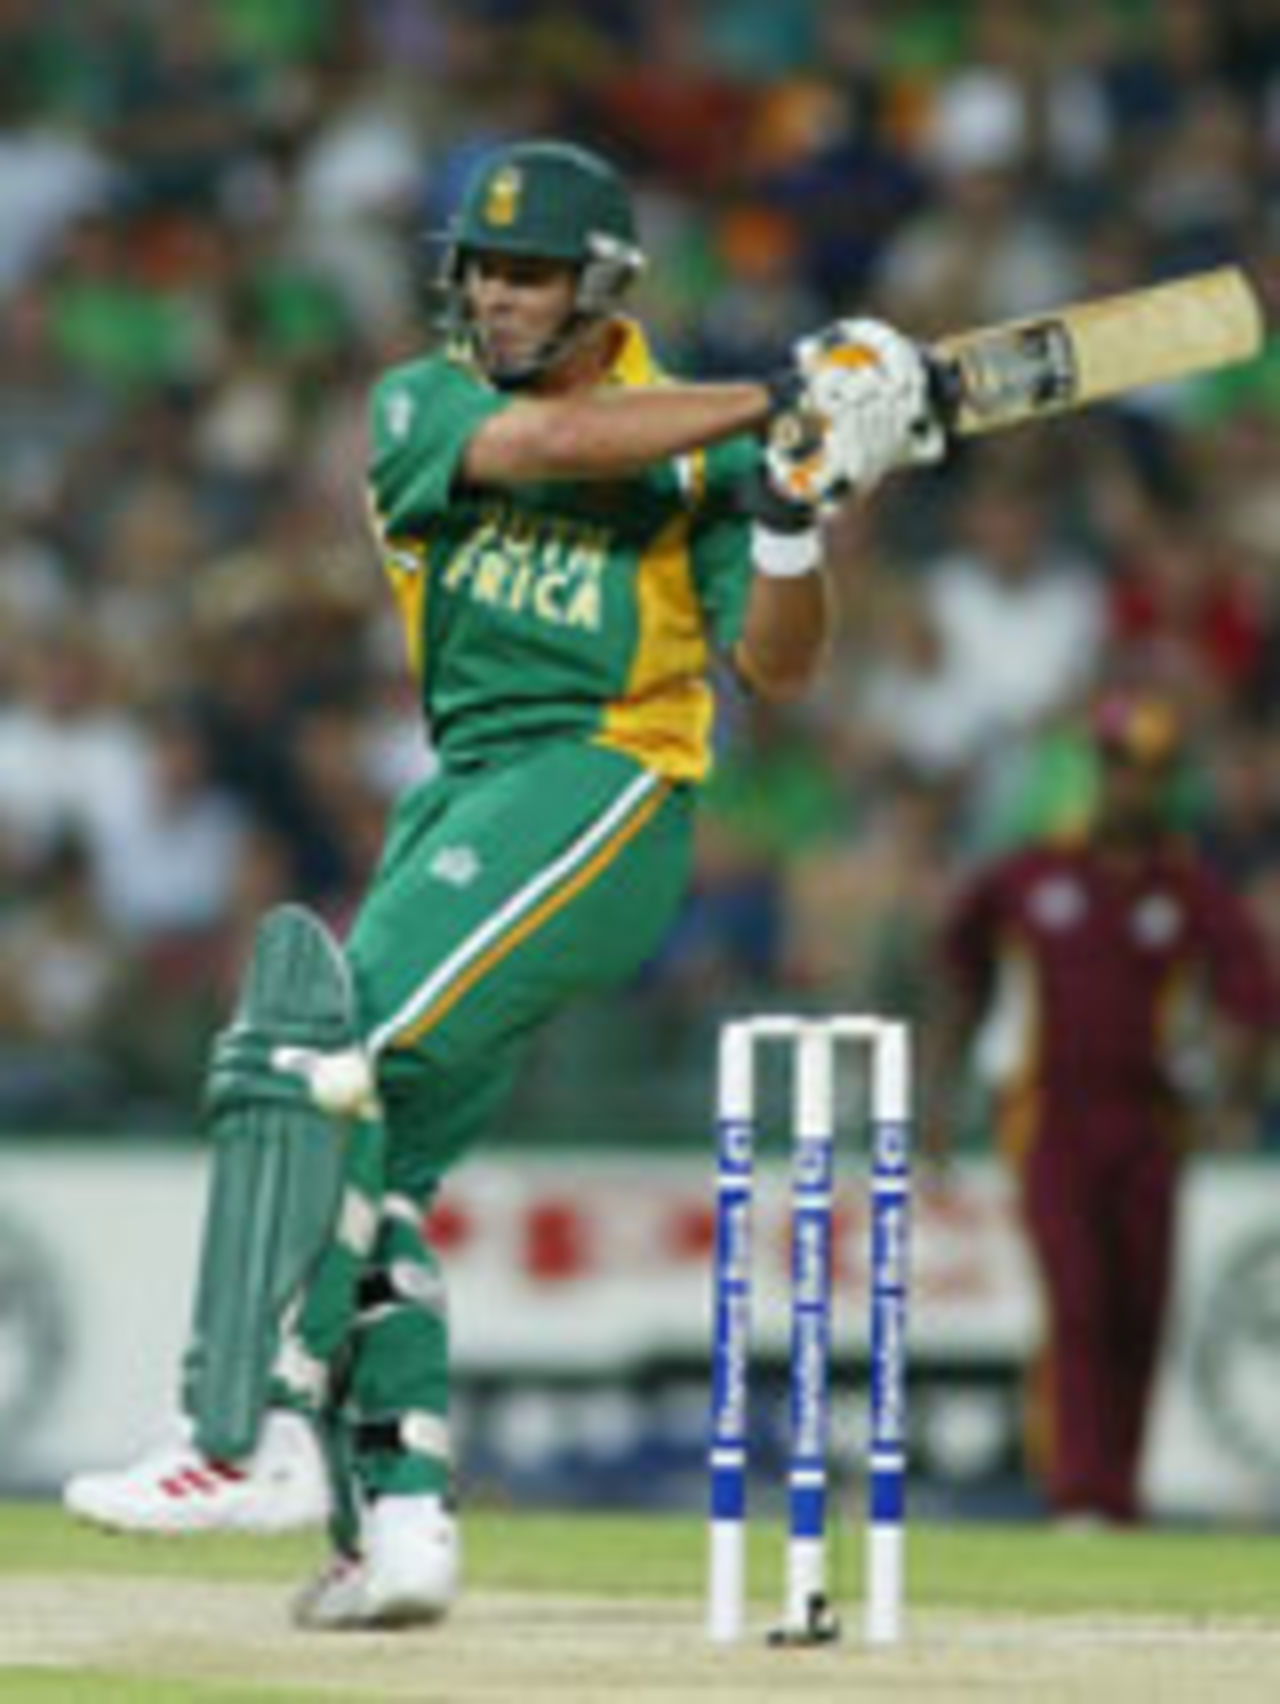 Jacques Kallis pulls on his way to 139, South Africa v West Indies, 5th ODI, February 4, 2004